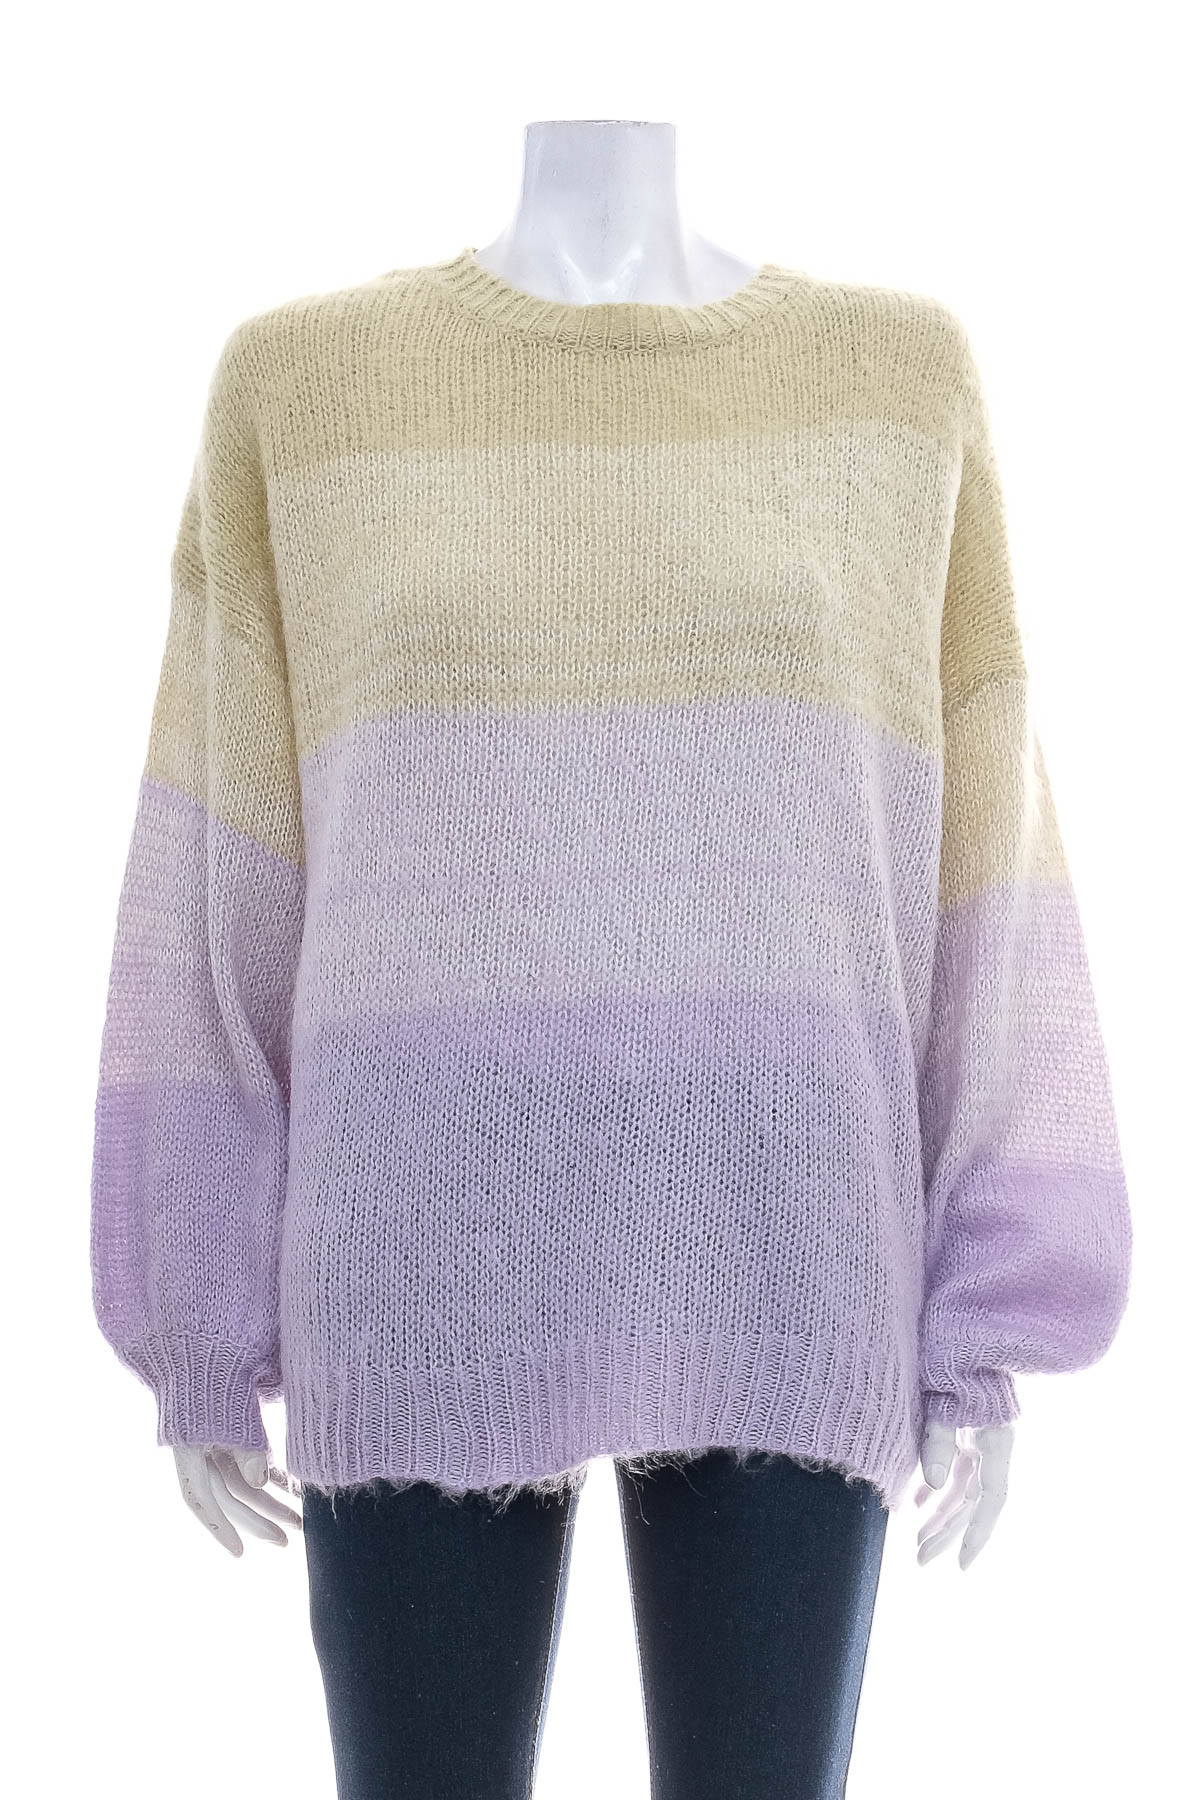 Women's sweater - Fria Silver Wishes - 0